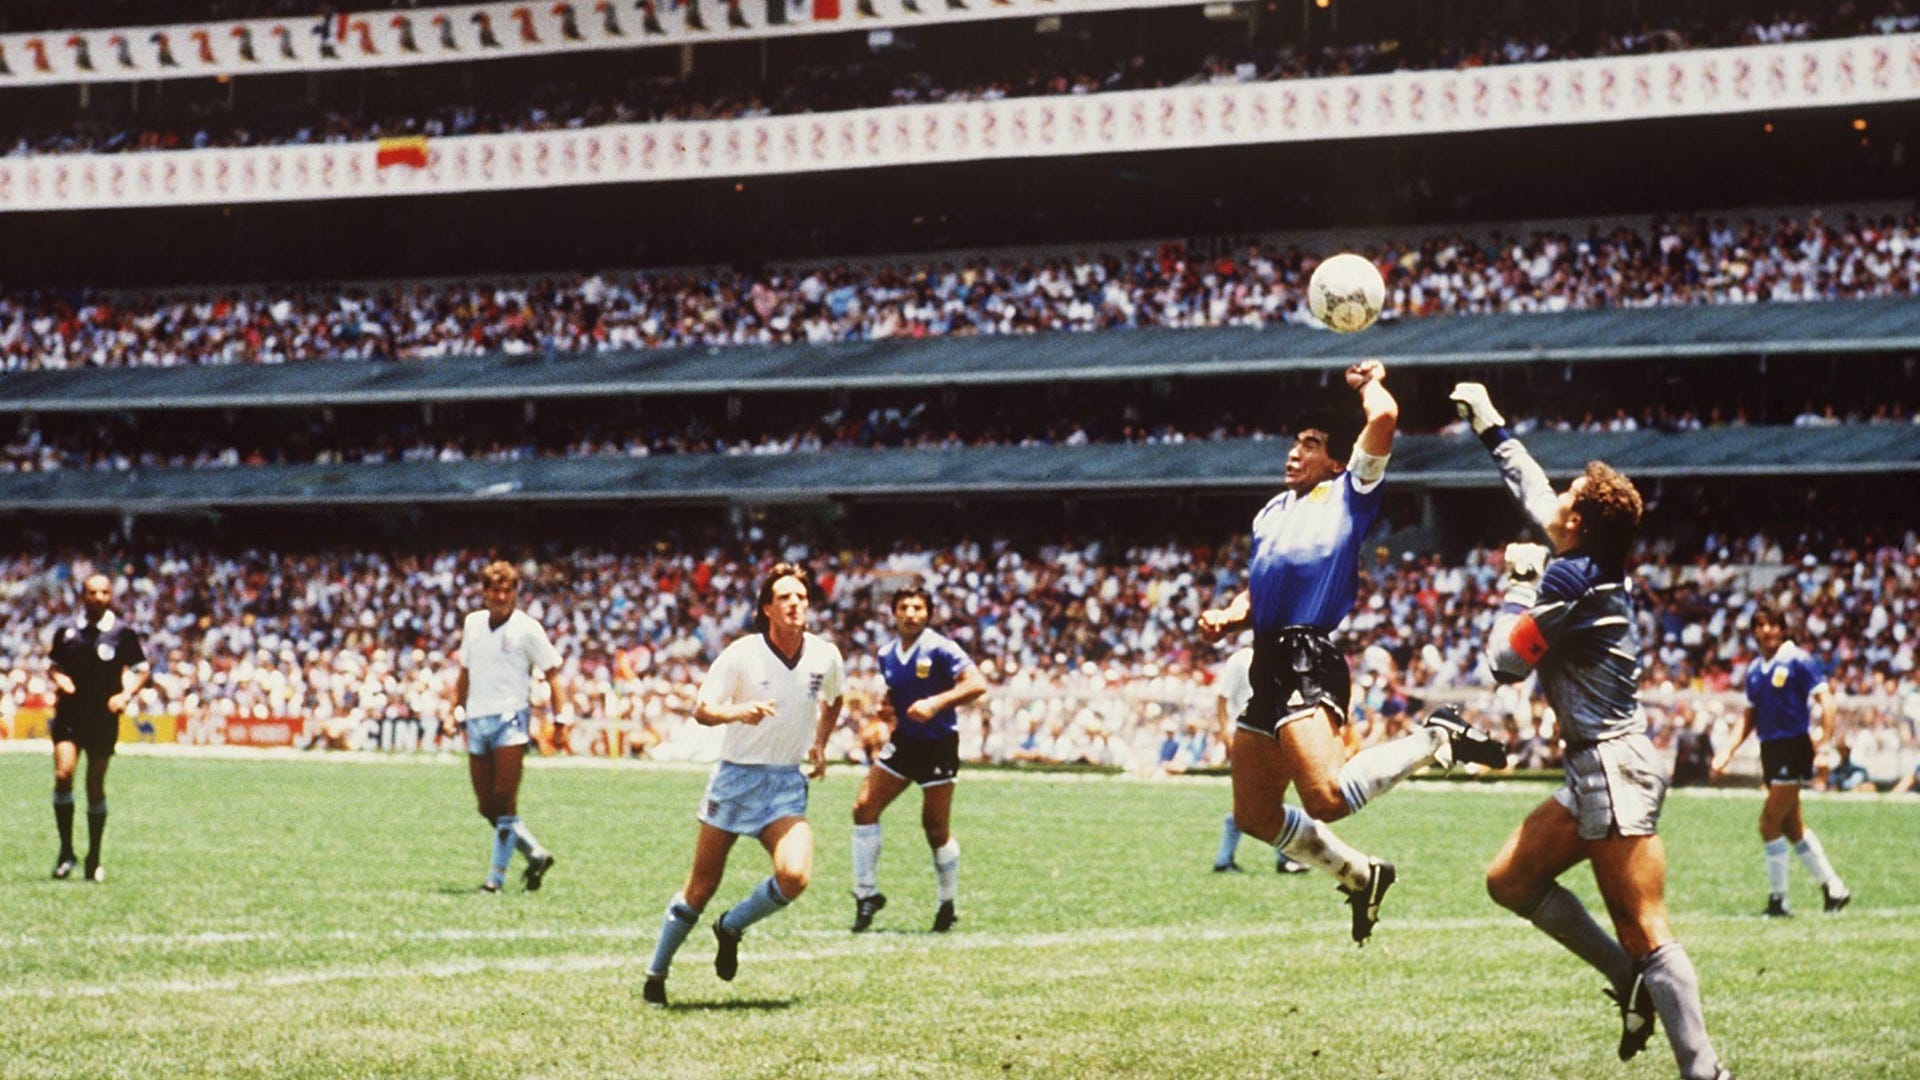 Diego Maradona & the Hand of God: The most infamous goal in World Cup history | Goal.com